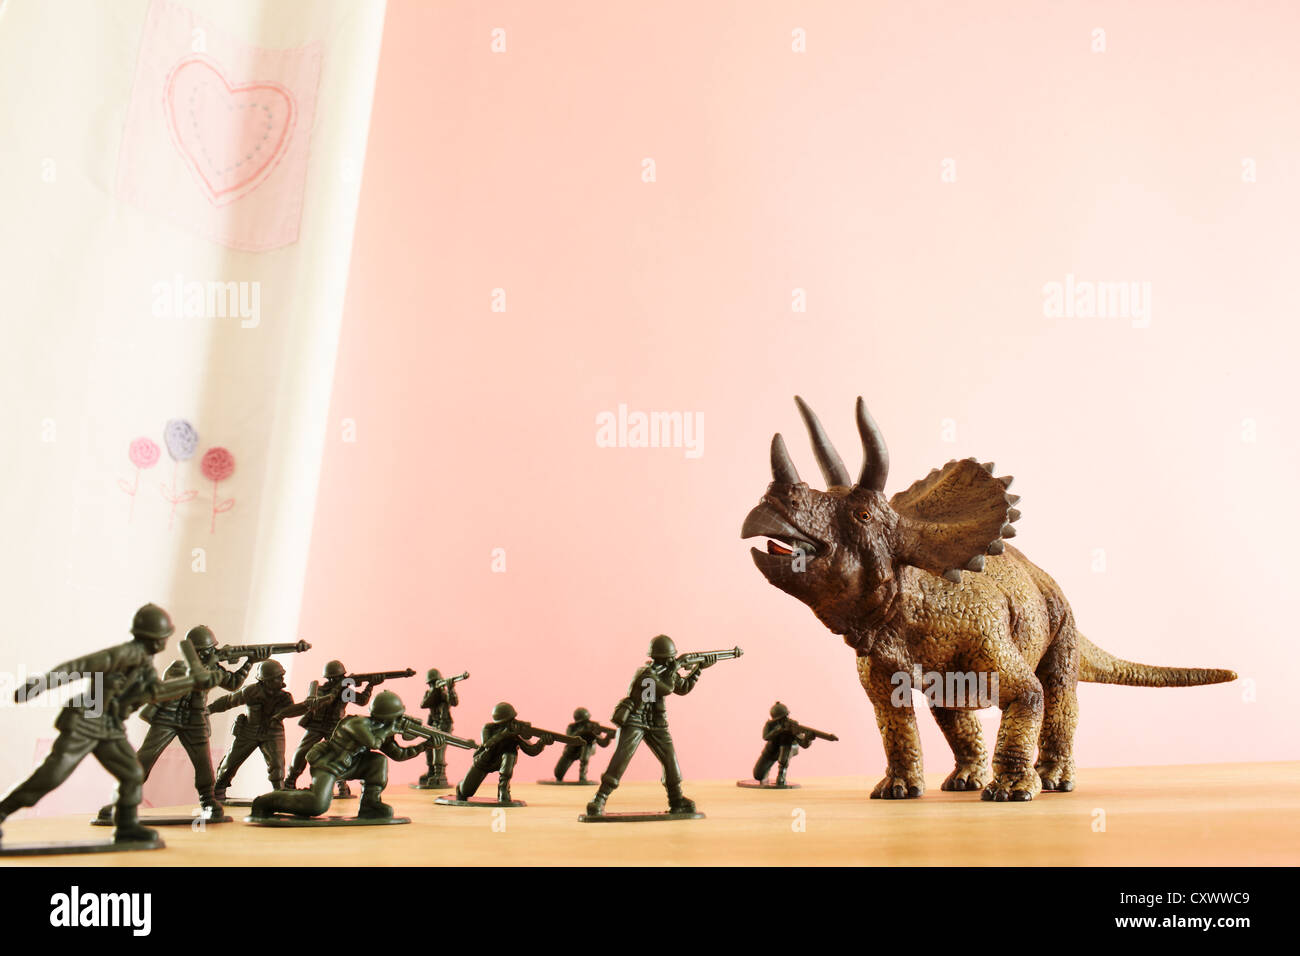 Toy soldiers attacking dinosaur Stock Photo